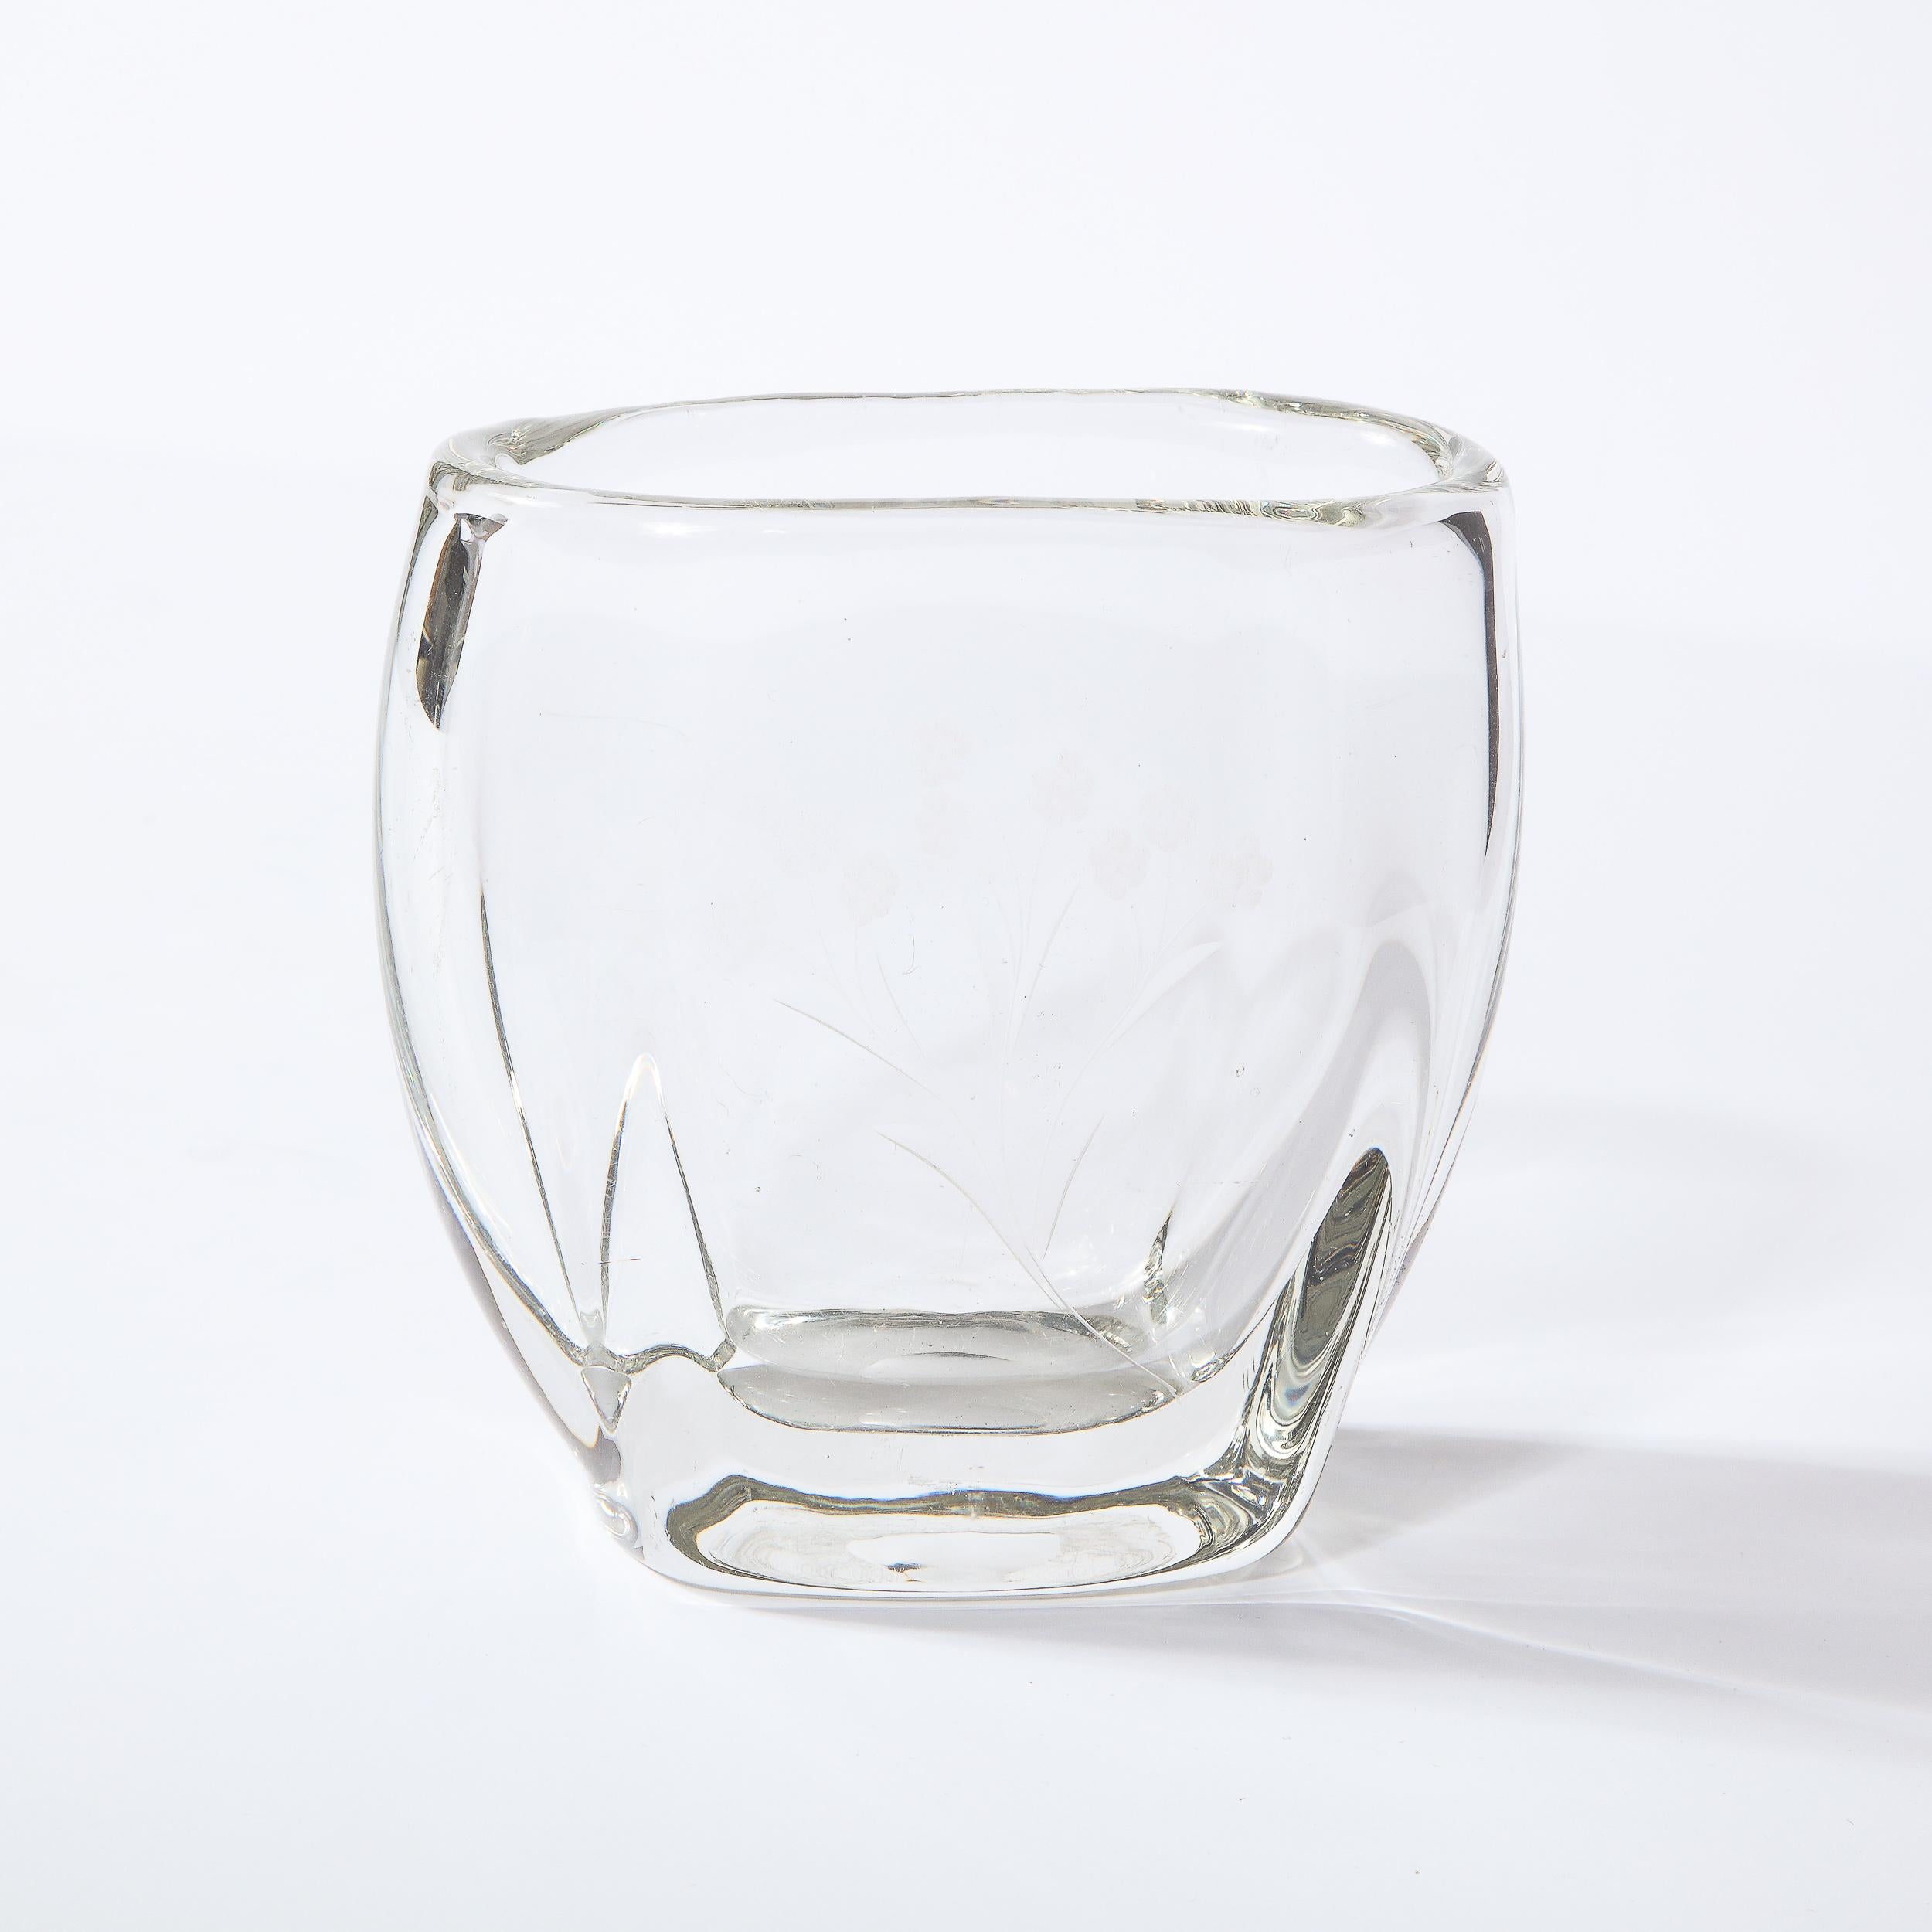 Glass Swedish Mid-Century Modern Etched & Frosted Translucent Vase with Floral Motif For Sale